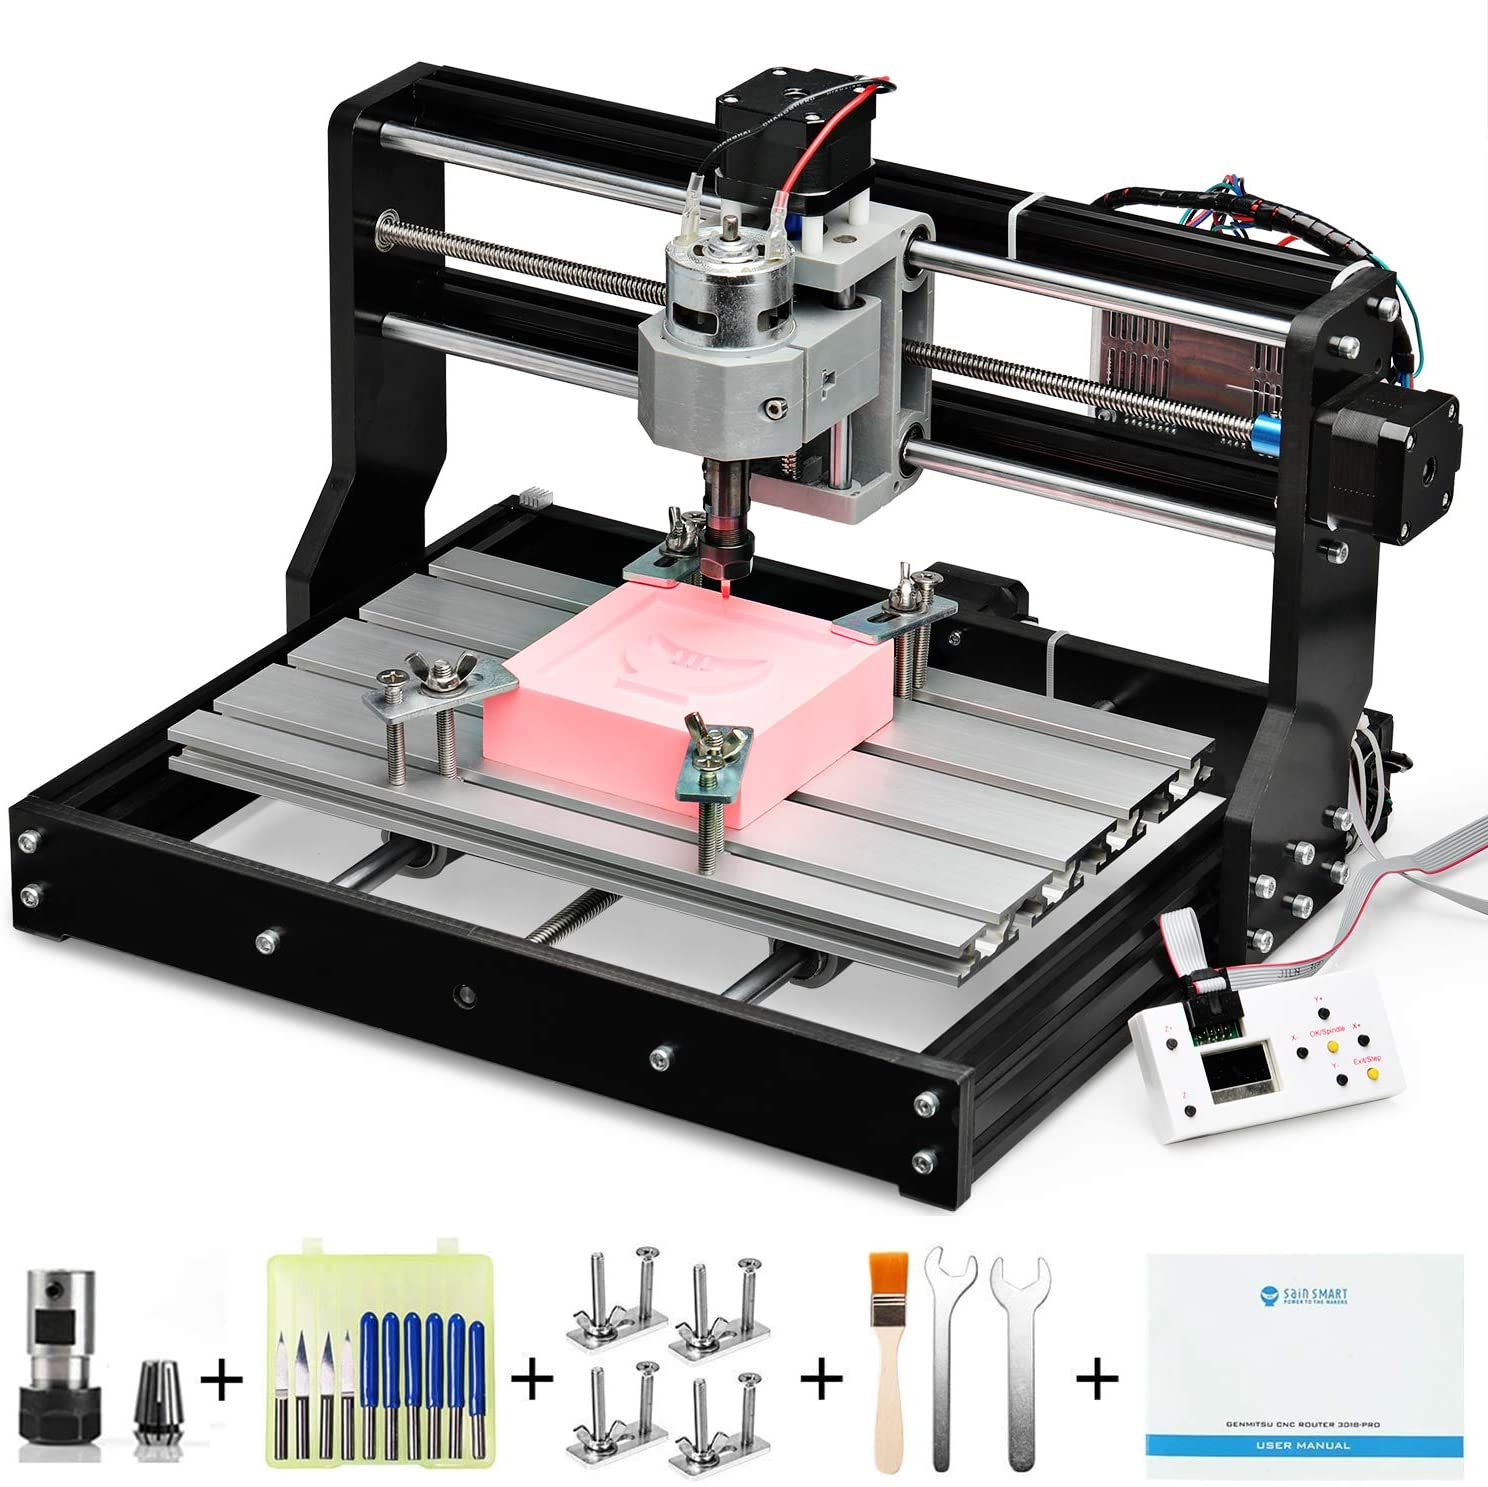 Top 8 Best CNC Milling Machine Reviews Brand Review